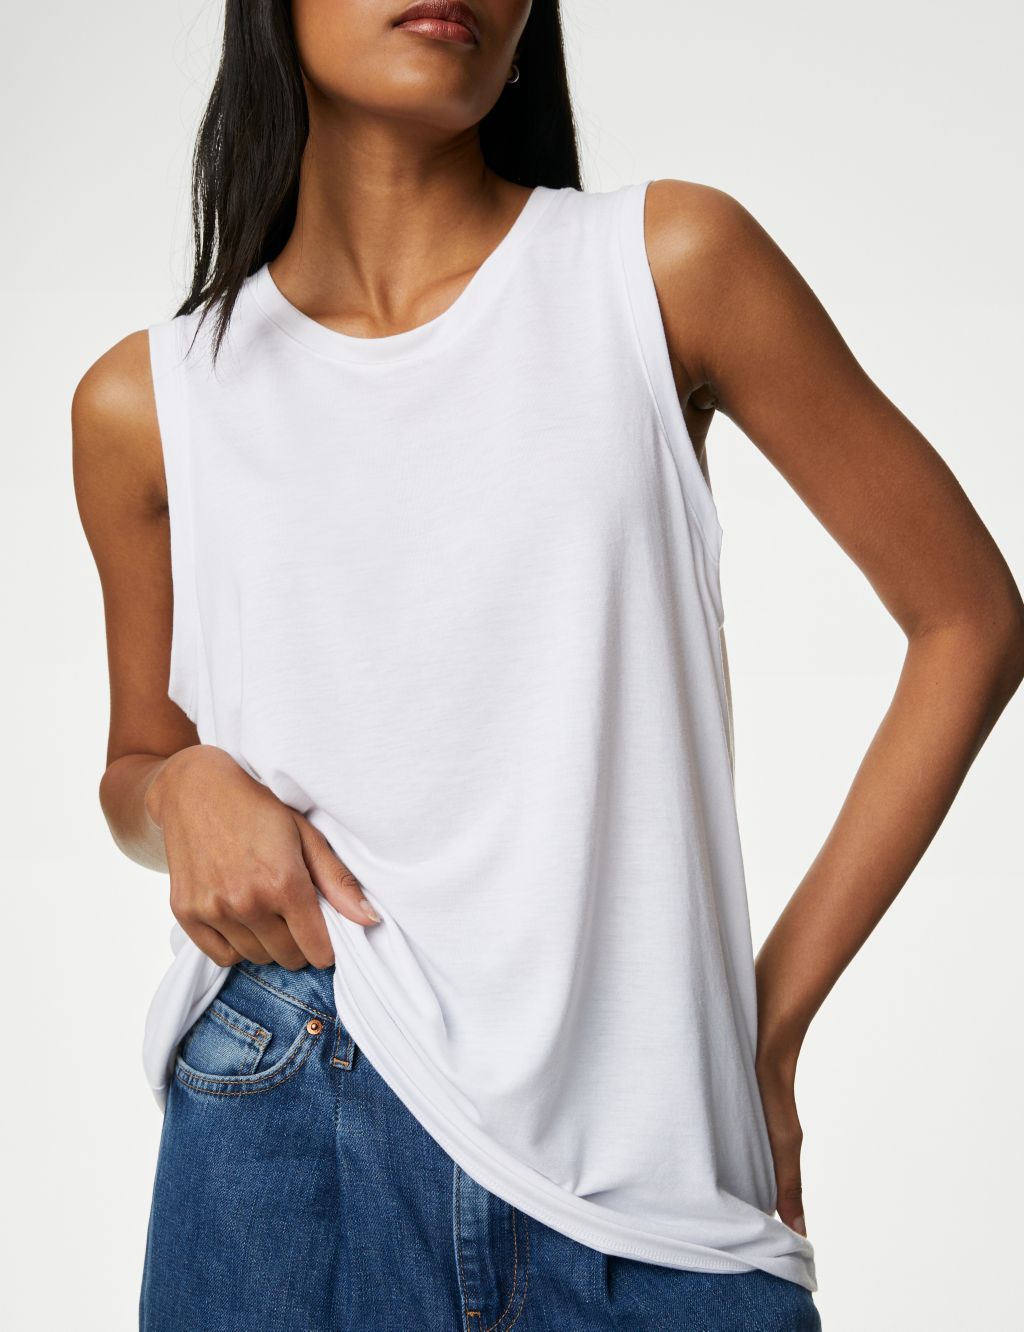 Relaxed Vest Top image 3